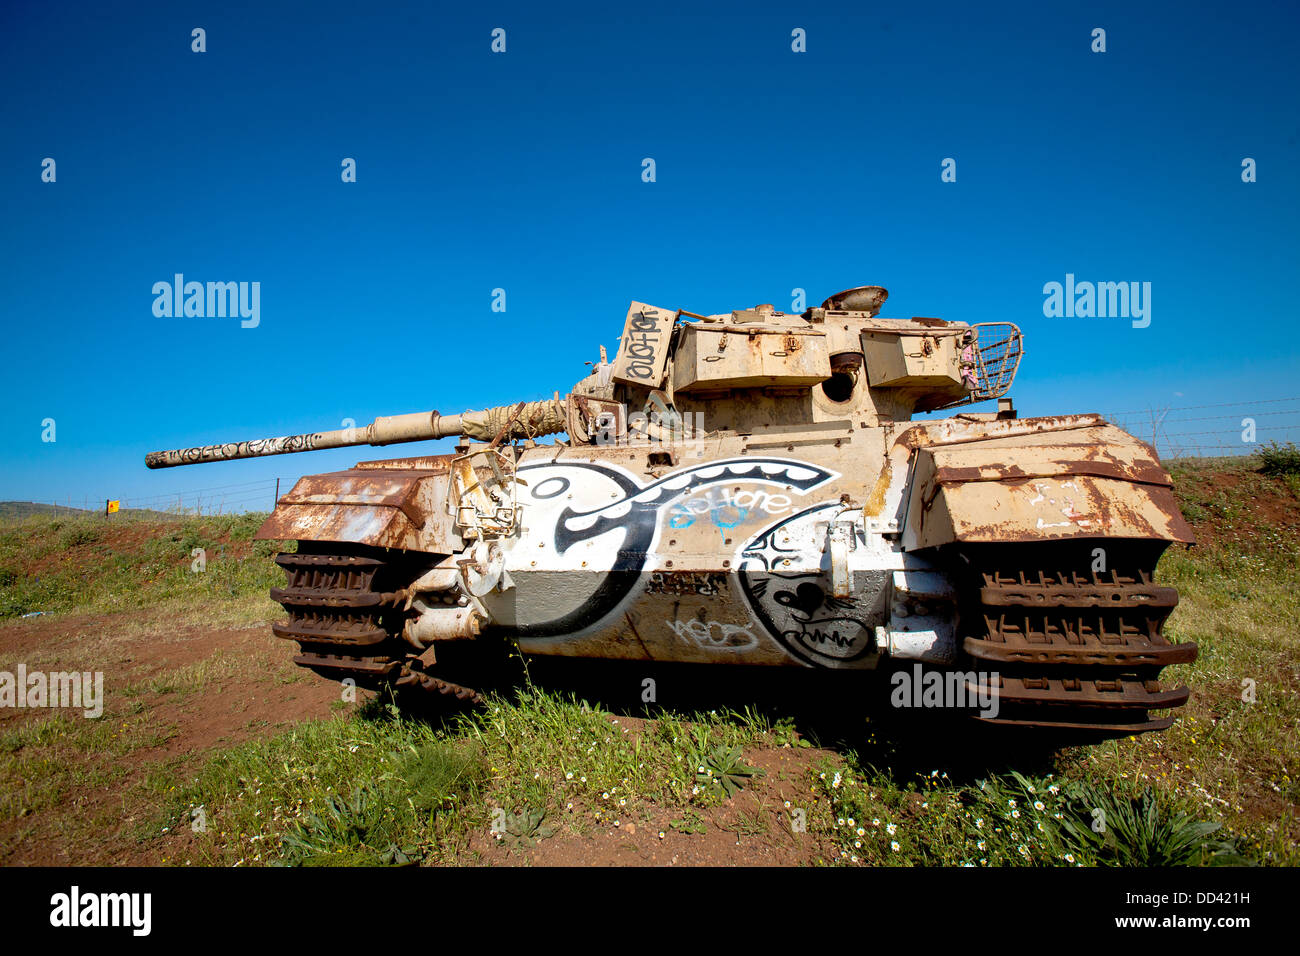 Israel, Golan Heights, Abandoned Syrian Tank from the 1973 war Stock Photo